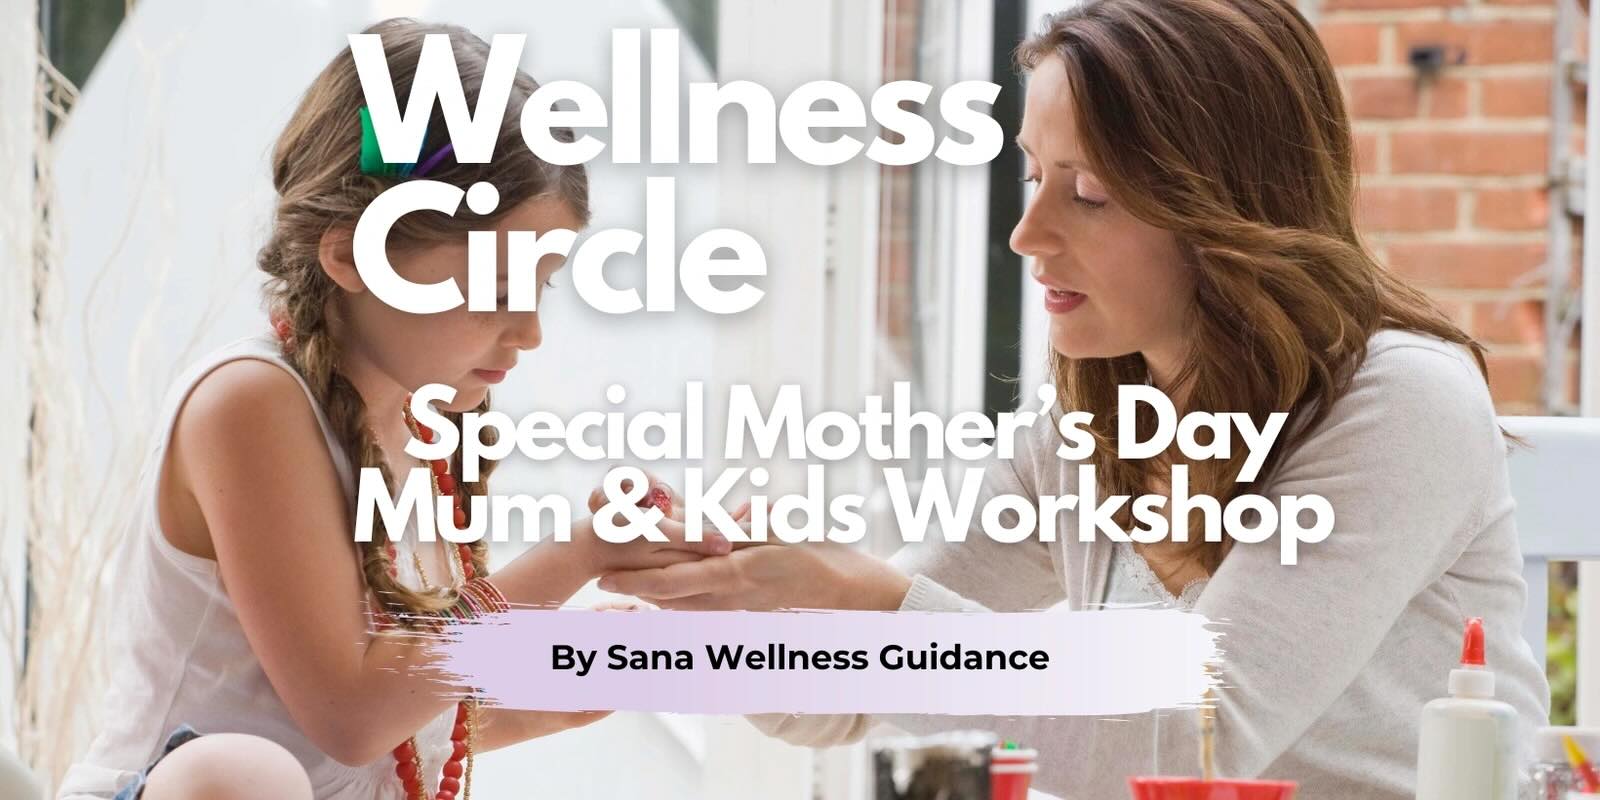 Special Mother's Day Wellness Circle - Mum & Kids Workshop